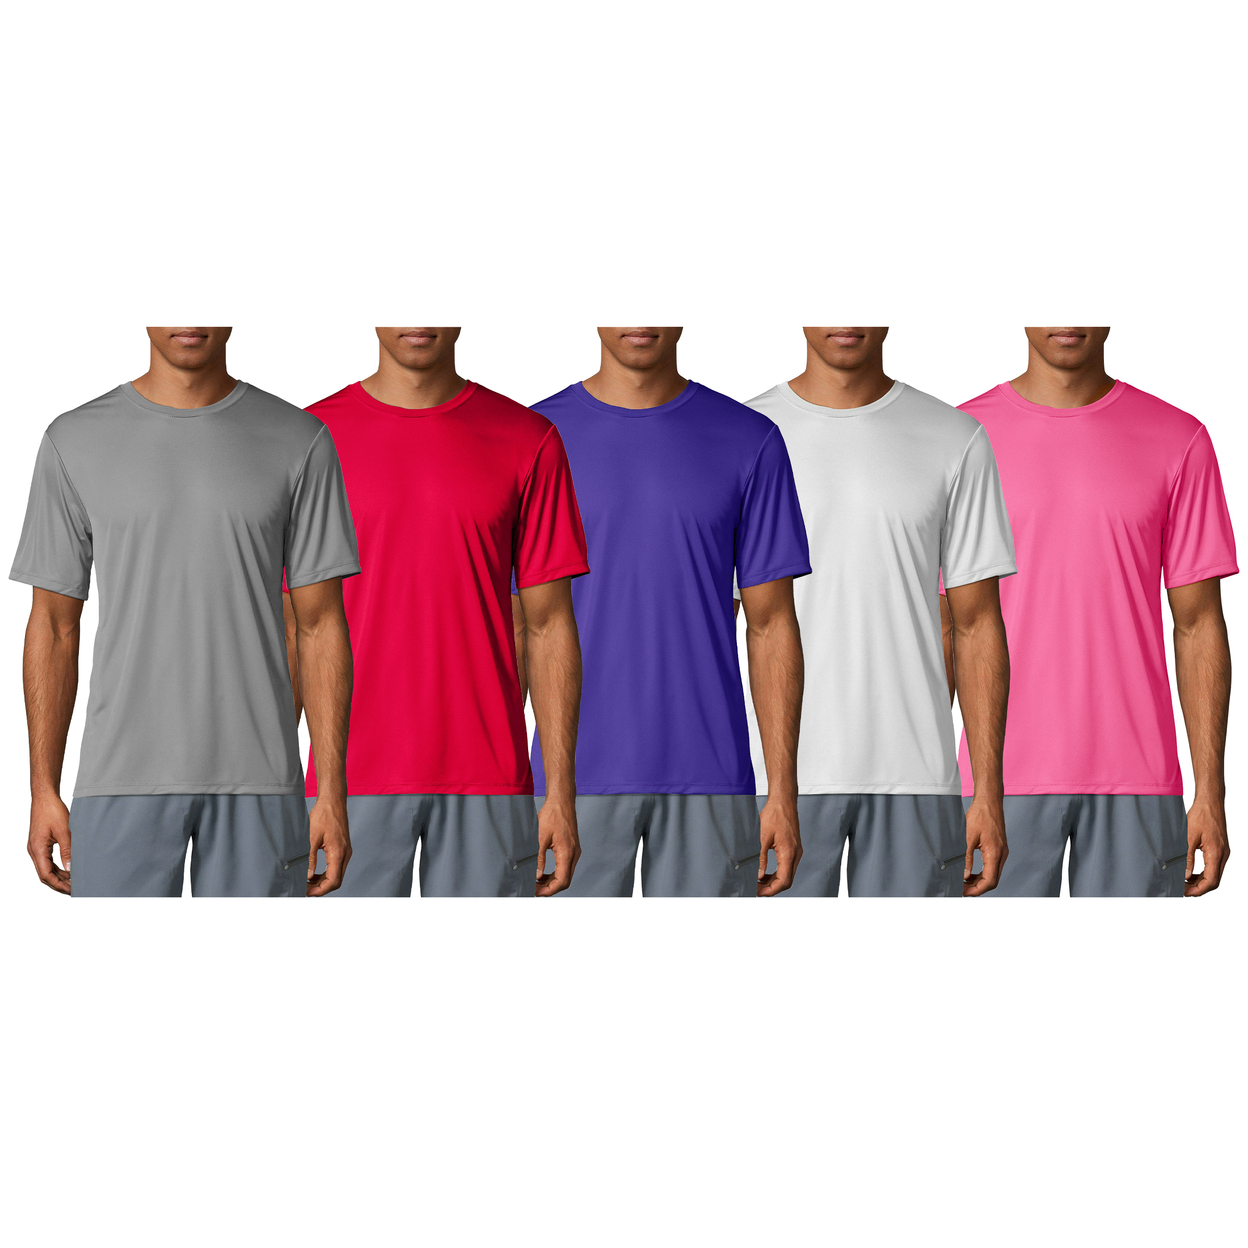 Multi-Pack: Men's Moisture Wicking Cool Dri-Fit Performance Short Sleeve Crew Neck T-Shirts - 3-pack, Small